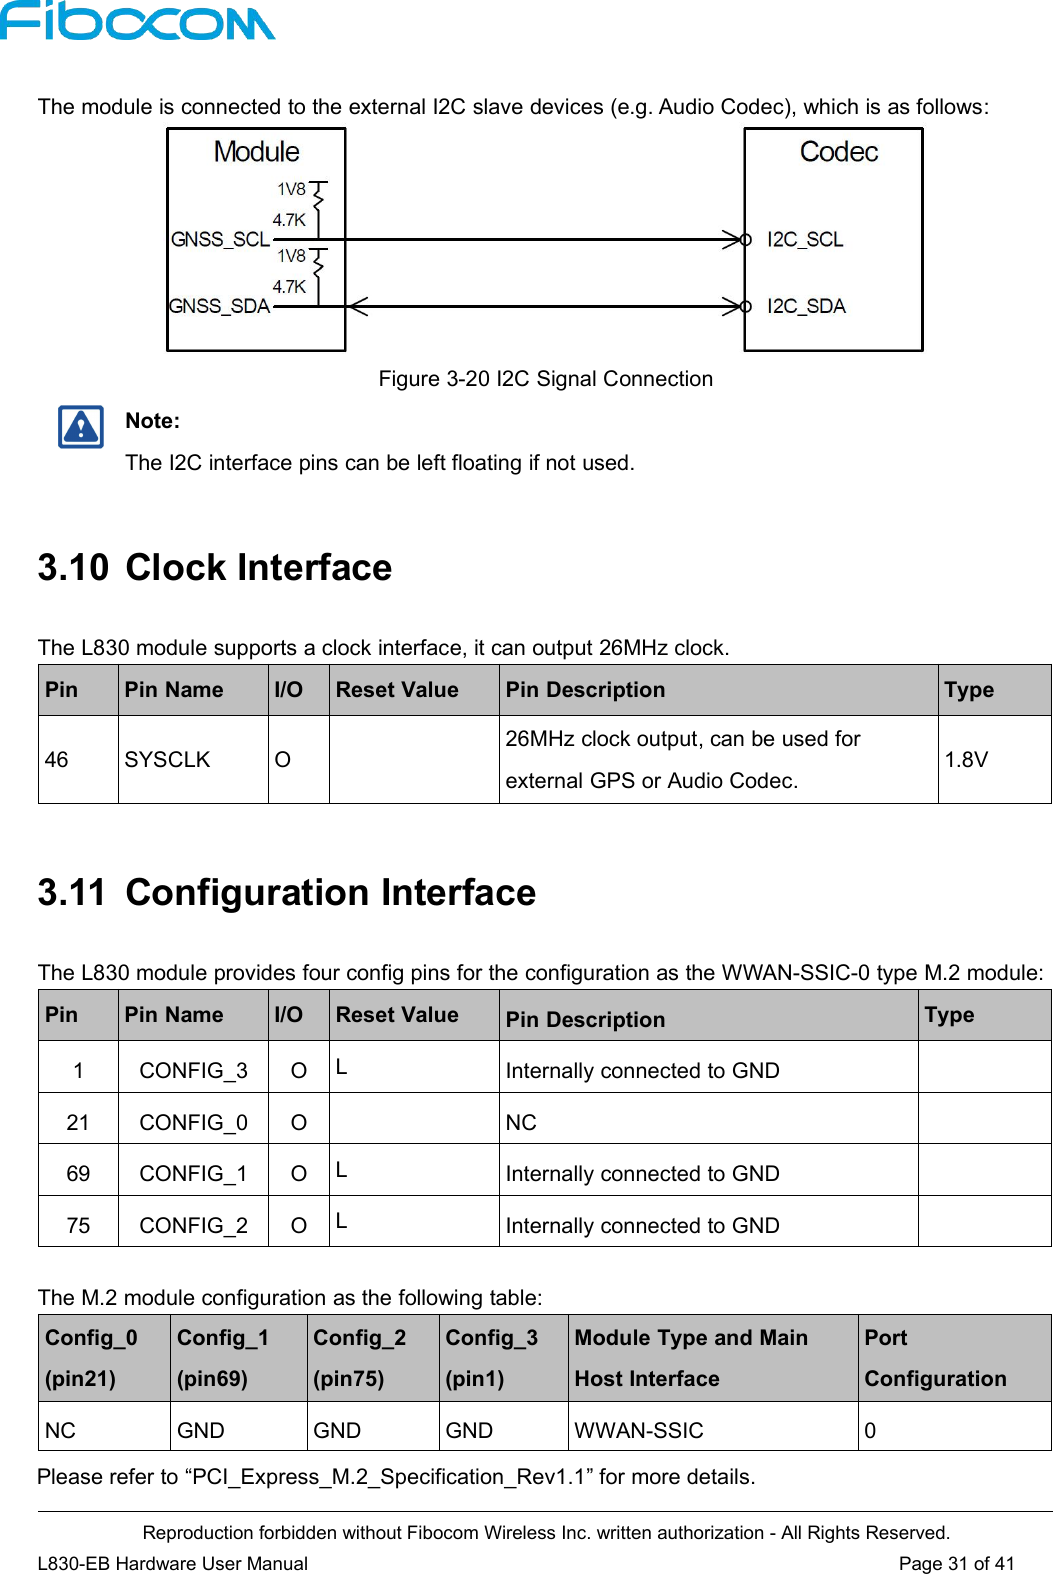 Reproduction forbidden without Fibocom Wireless Inc. written authorization - All Rights Reserved.L830-EB Hardware User Manual Page 31 of 41The module is connected to the external I2C slave devices (e.g. Audio Codec), which is as follows:Figure 3-20 I2C Signal ConnectionNote:The I2C interface pins can be left floating if not used.3.10 Clock InterfaceThe L830 module supports a clock interface, it can output 26MHz clock.PinPin NameI/OReset ValuePin DescriptionType46SYSCLKO26MHz clock output, can be used forexternal GPS or Audio Codec.1.8V3.11 Configuration InterfaceThe L830 module provides four config pins for the configuration as the WWAN-SSIC-0 type M.2 module:PinPin NameI/OReset ValuePin DescriptionType1CONFIG_3OLInternally connected to GND21CONFIG_0ONC69CONFIG_1OLInternally connected to GND75CONFIG_2OLInternally connected to GNDThe M.2 module configuration as the following table:Config_0(pin21)Config_1(pin69)Config_2(pin75)Config_3(pin1)Module Type and MainHost InterfacePortConfigurationNCGNDGNDGNDWWAN-SSIC0Please refer to “PCI_Express_M.2_Specification_Rev1.1” for more details.